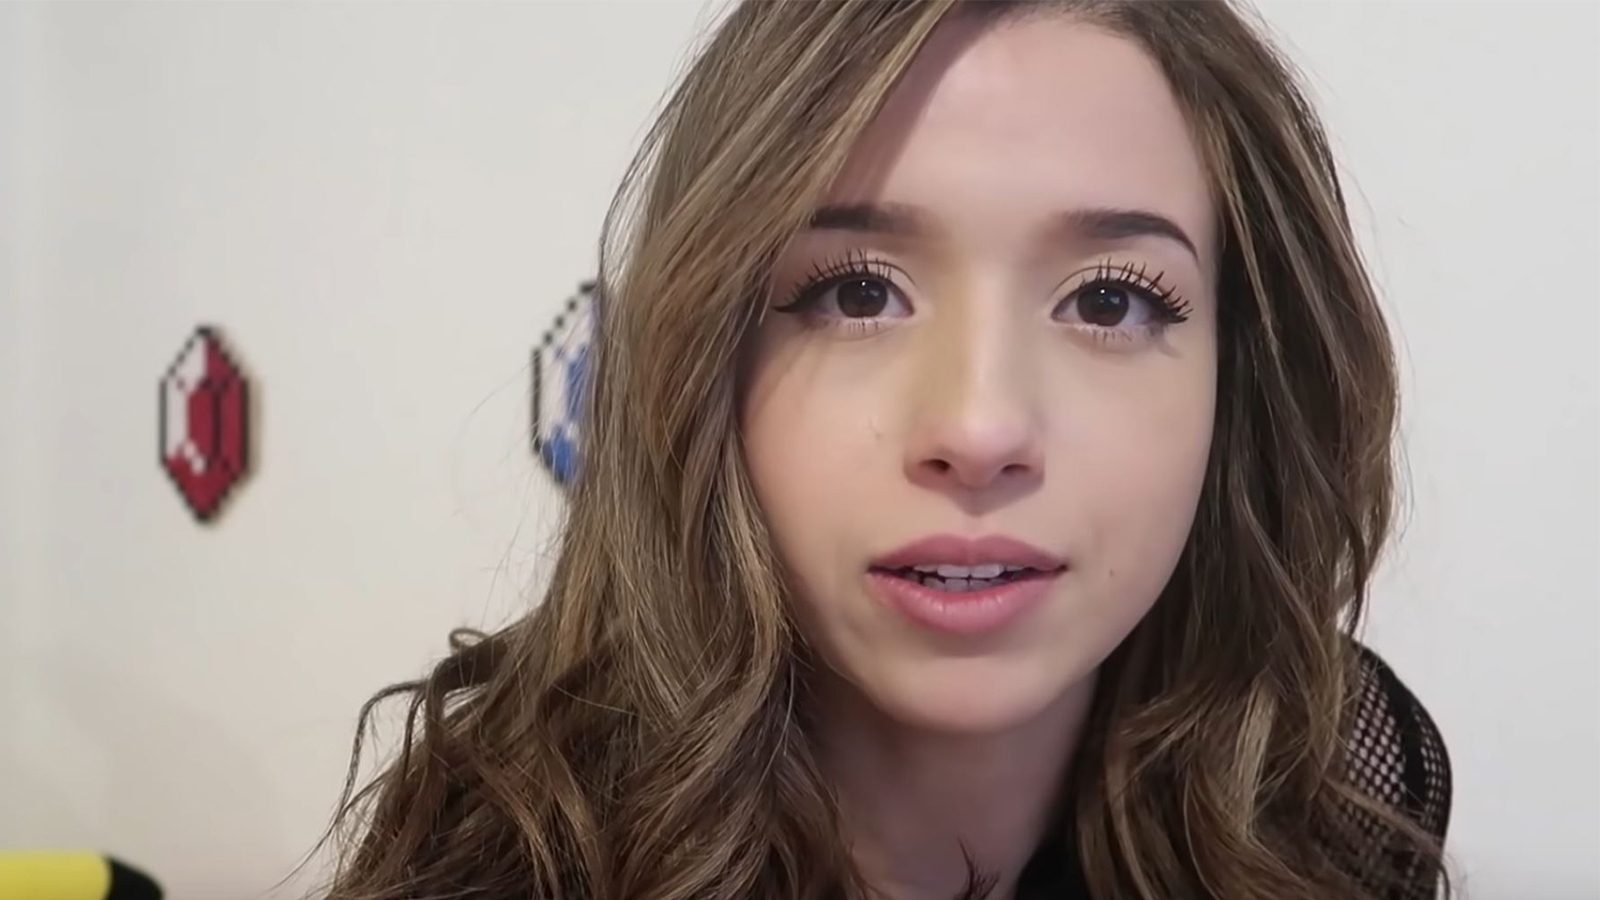 Pokimane Cries After Receiving Online Hate During Emotional Twitch